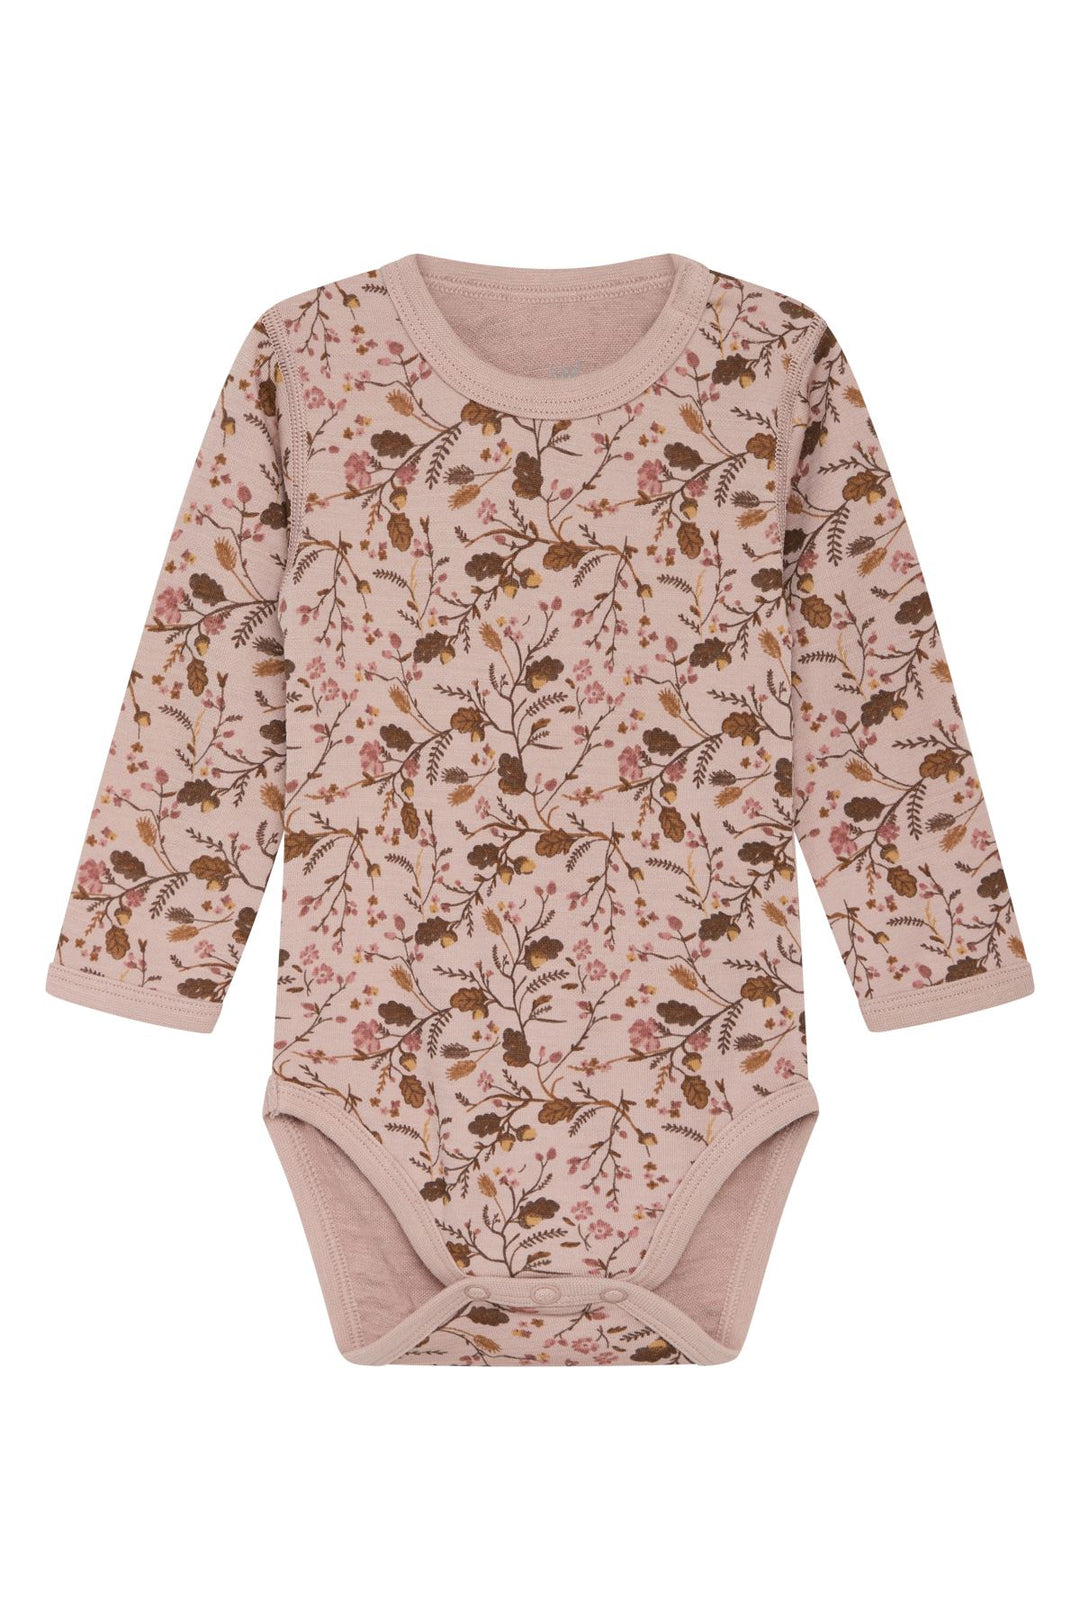 Hust & Claire Wool Badia Body - Shade rose Ulltøy Hust & Claire 